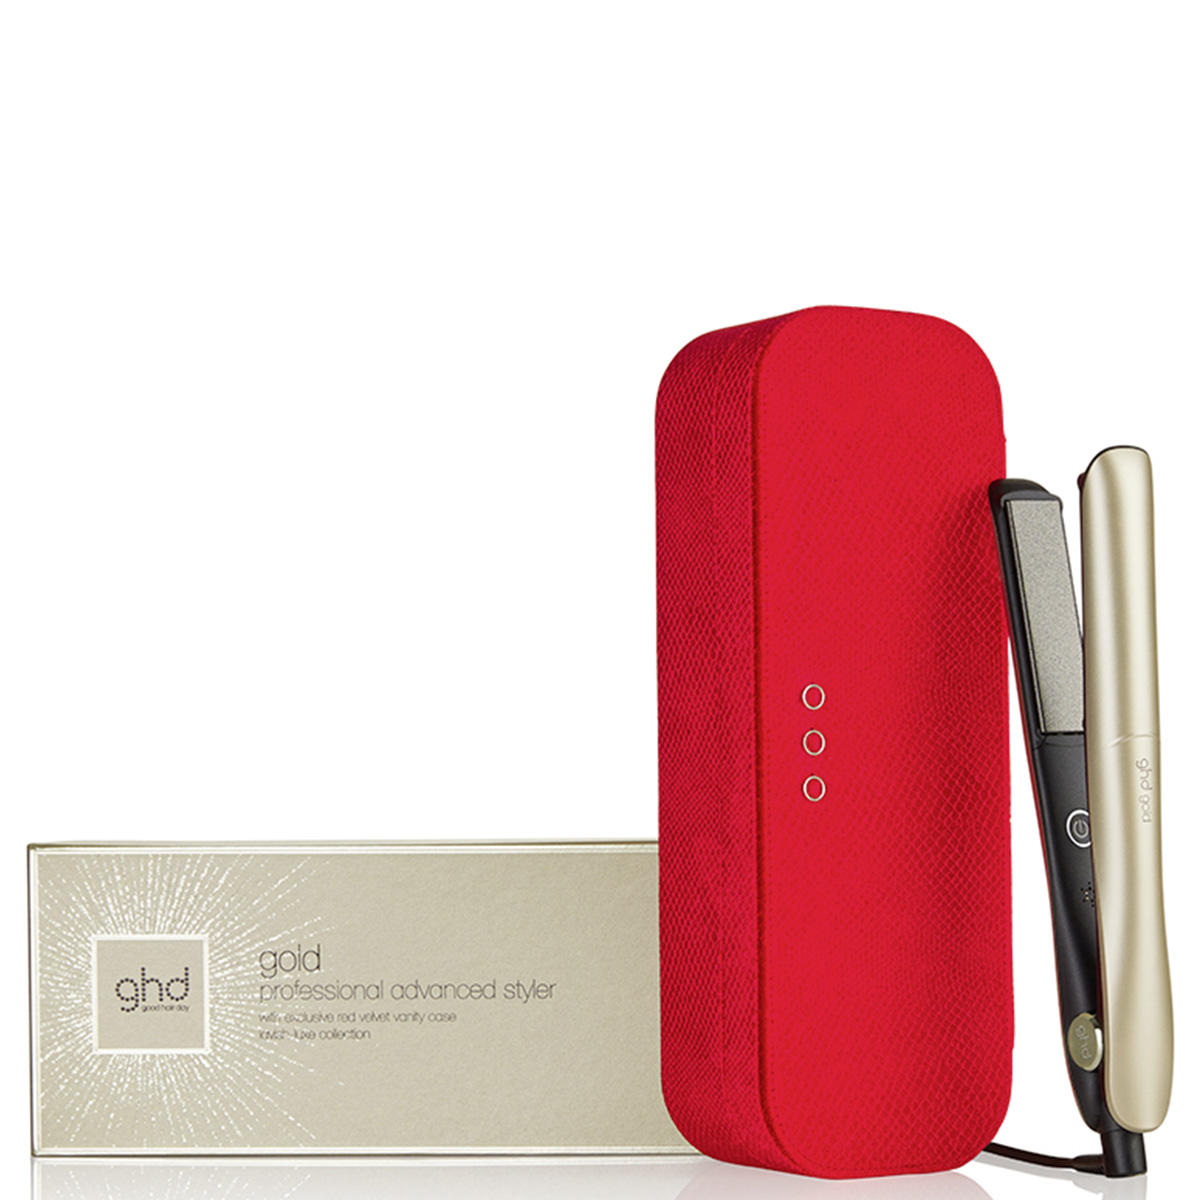 ghd grand-luxe gold Styler champagner-gold - 2